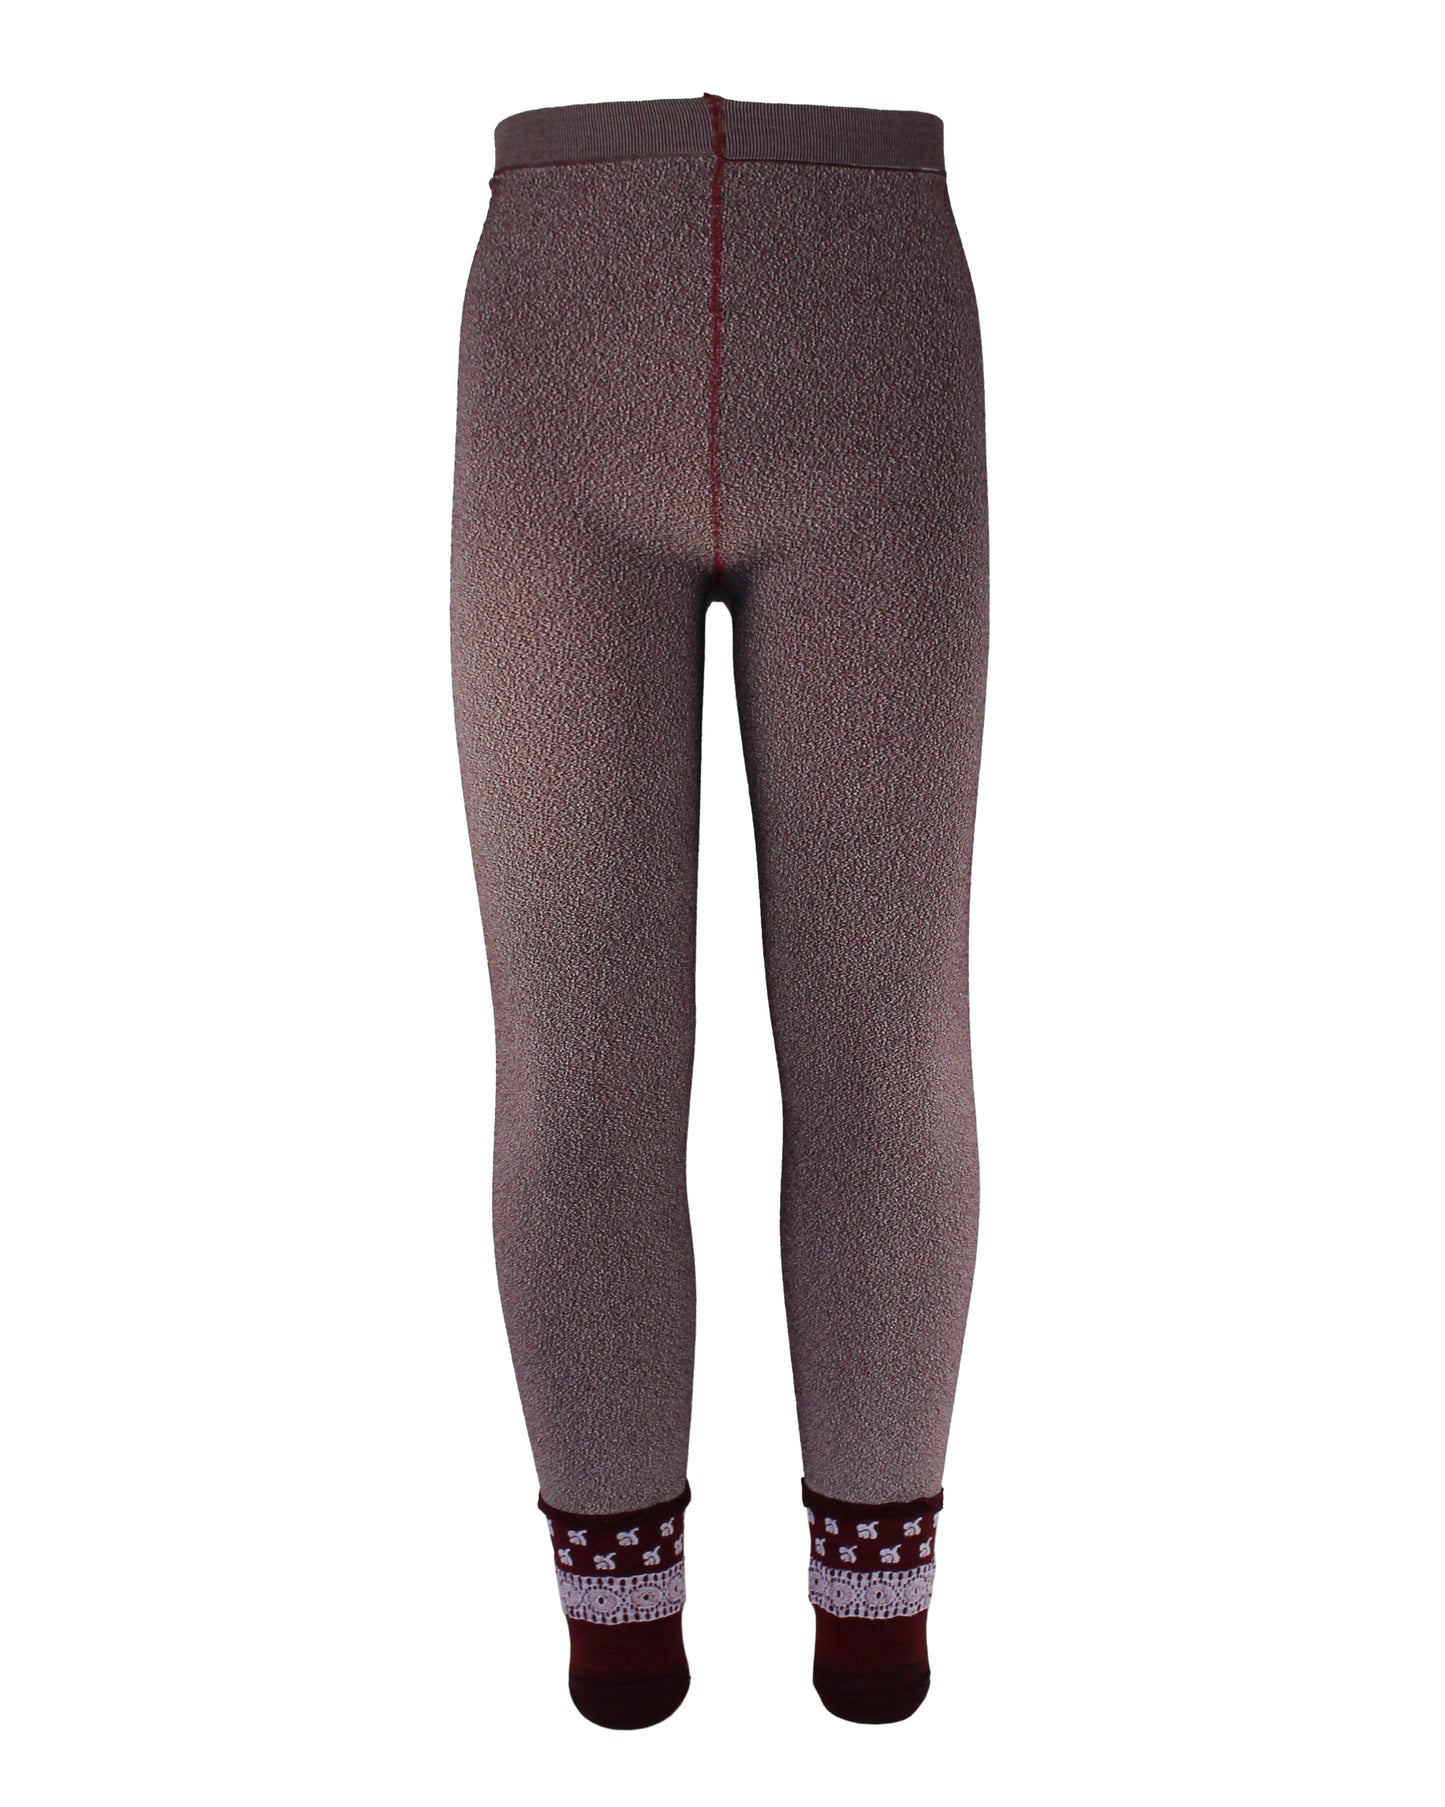 Omsa Peppermint Leggings - Soft ultra opaque kid's footless tights with an all over burgundy, wine and white fleck effect and deep embroidered cuff with a woven floral lace and flower pattern and ruched cuff.